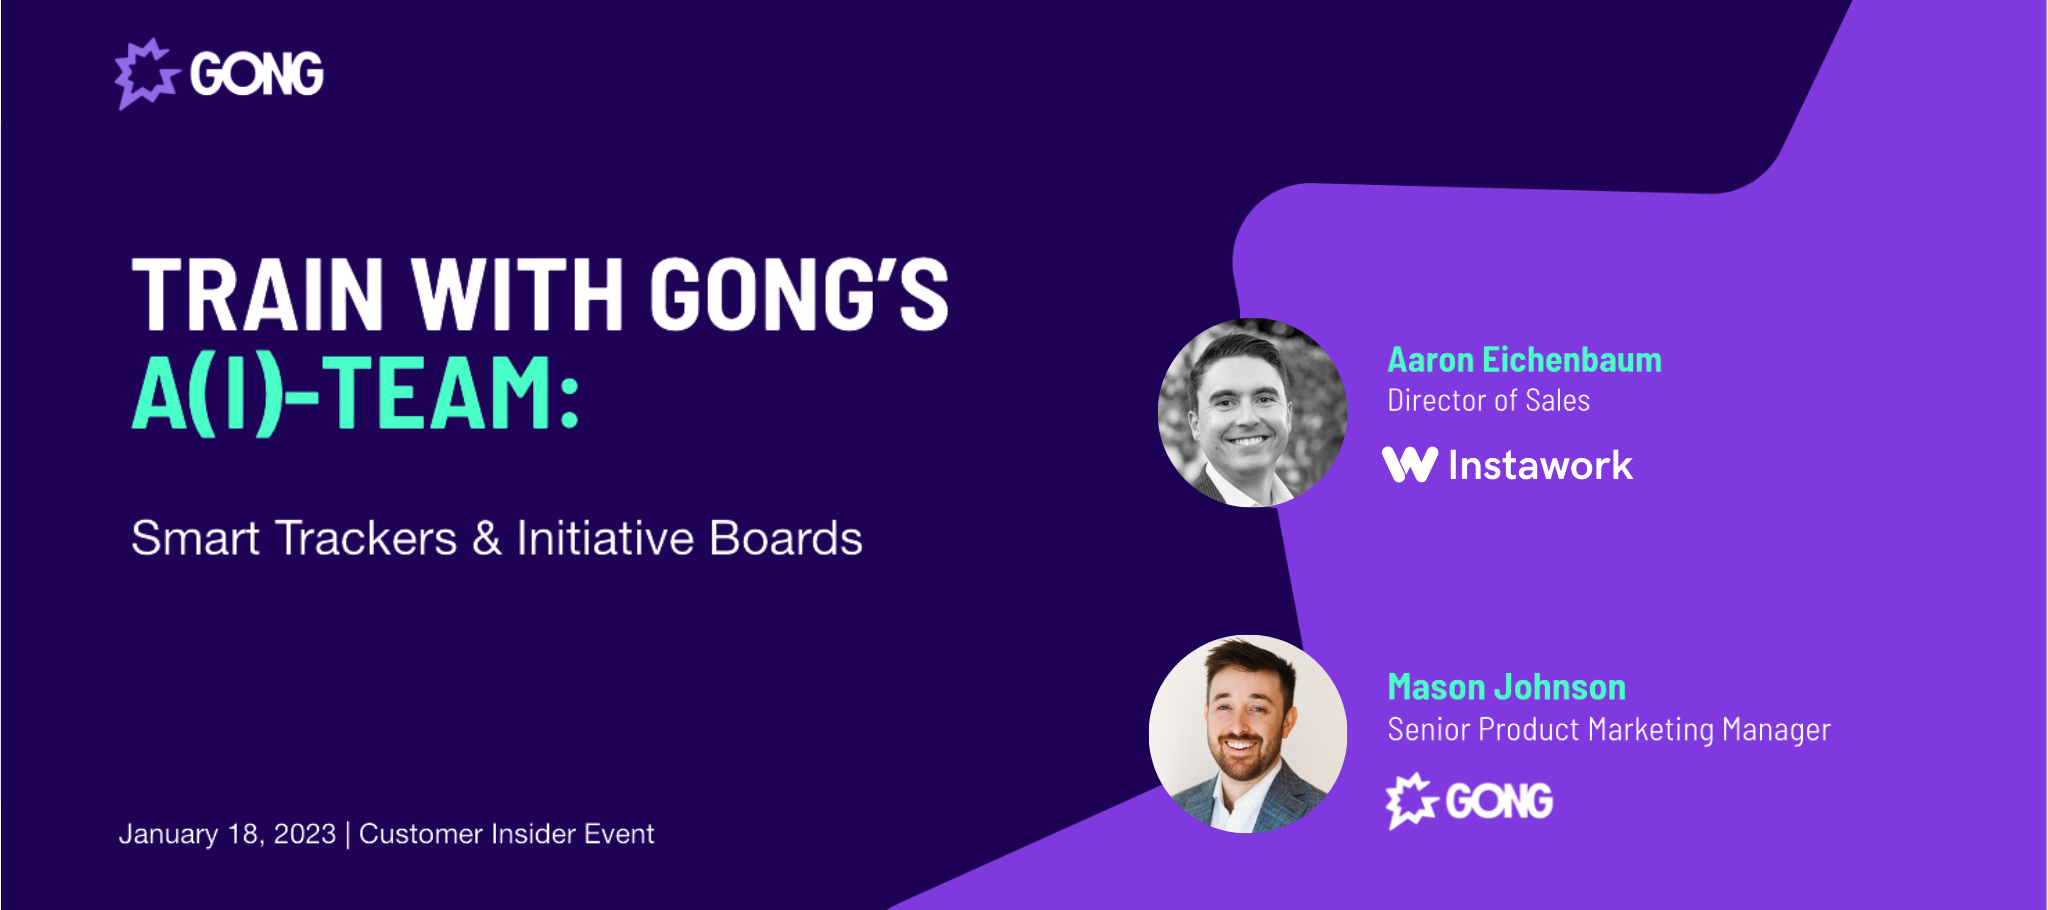 Tips from Customer Insider Event - Train With Gong's A(I) Team: Smart Trackers & Deal Boards